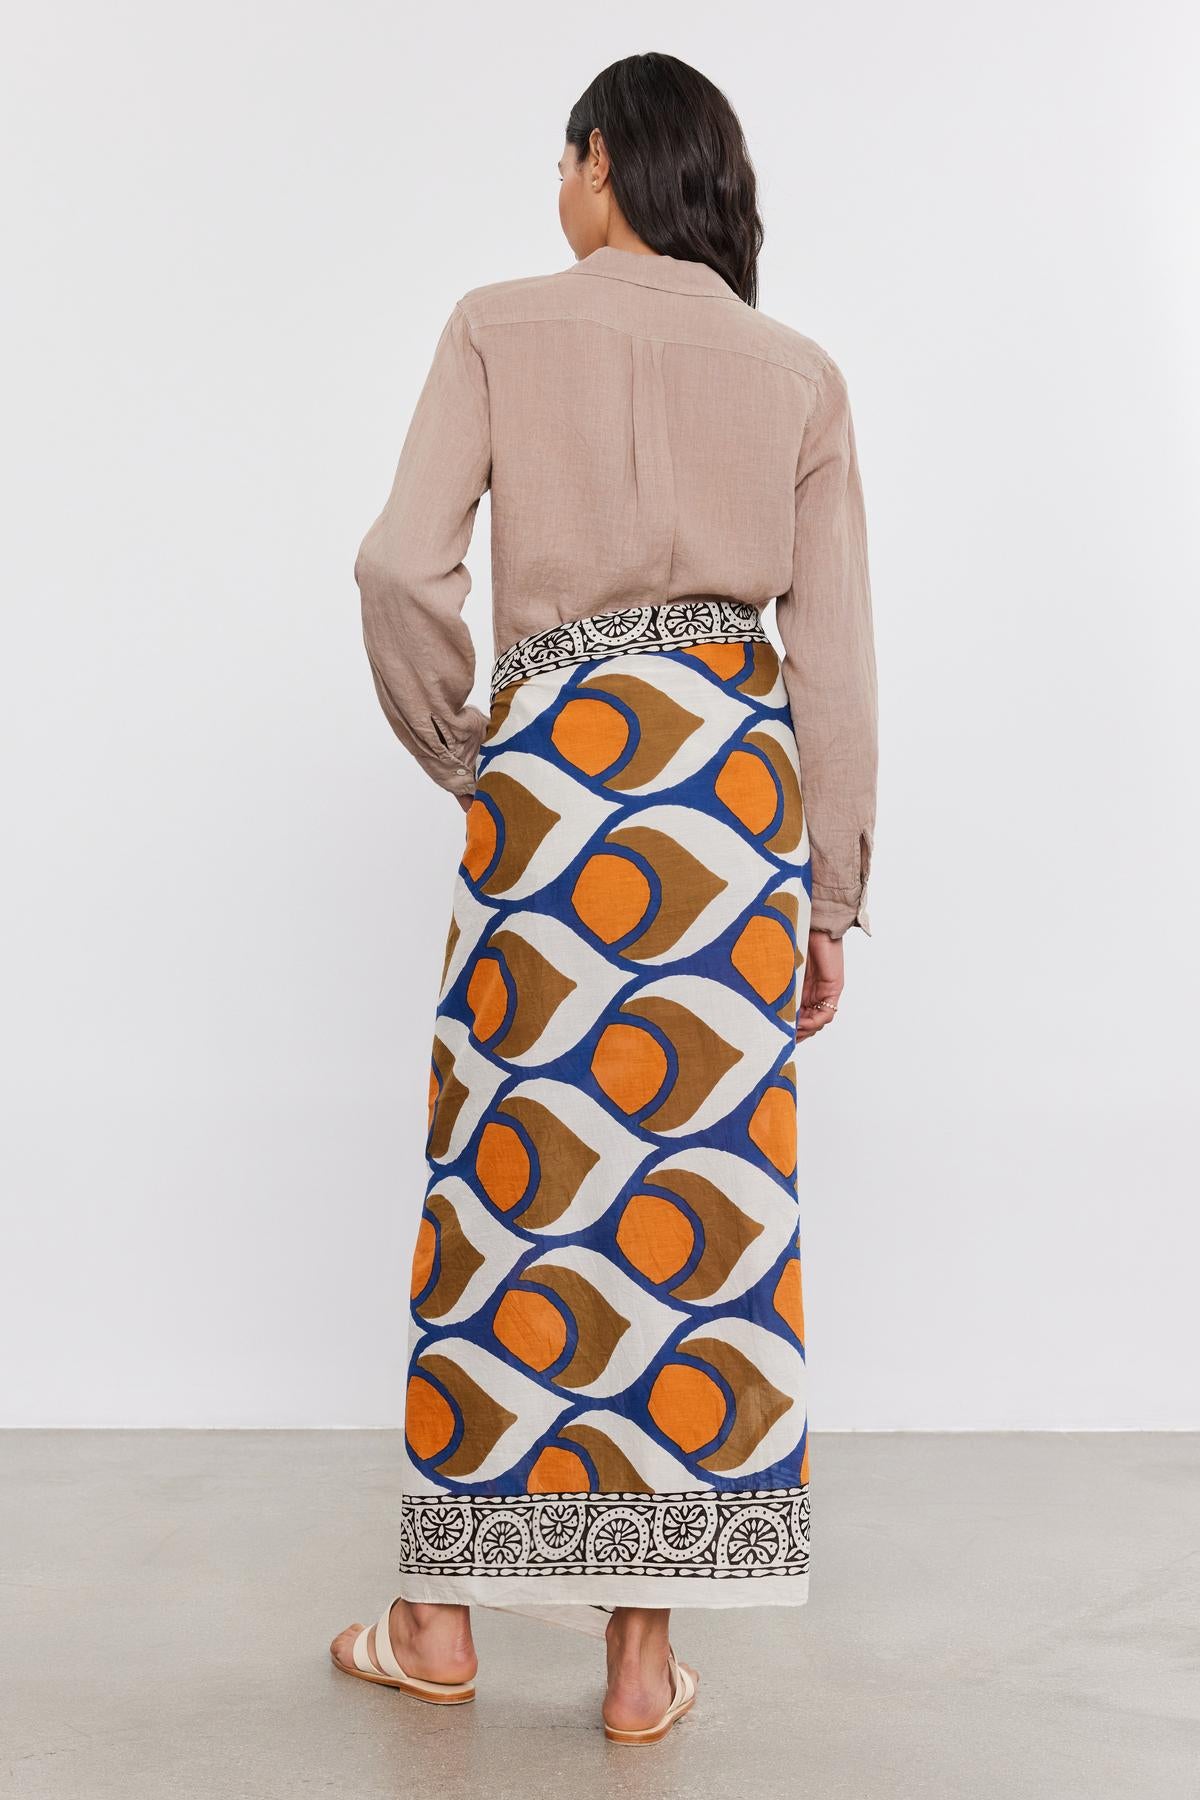 A woman standing with her back to the camera, wearing a beige blouse and a colorful geometric-patterned SARONG WRAP skirt from Velvet by Graham & Spencer, paired with tan sandals.-36752949182657